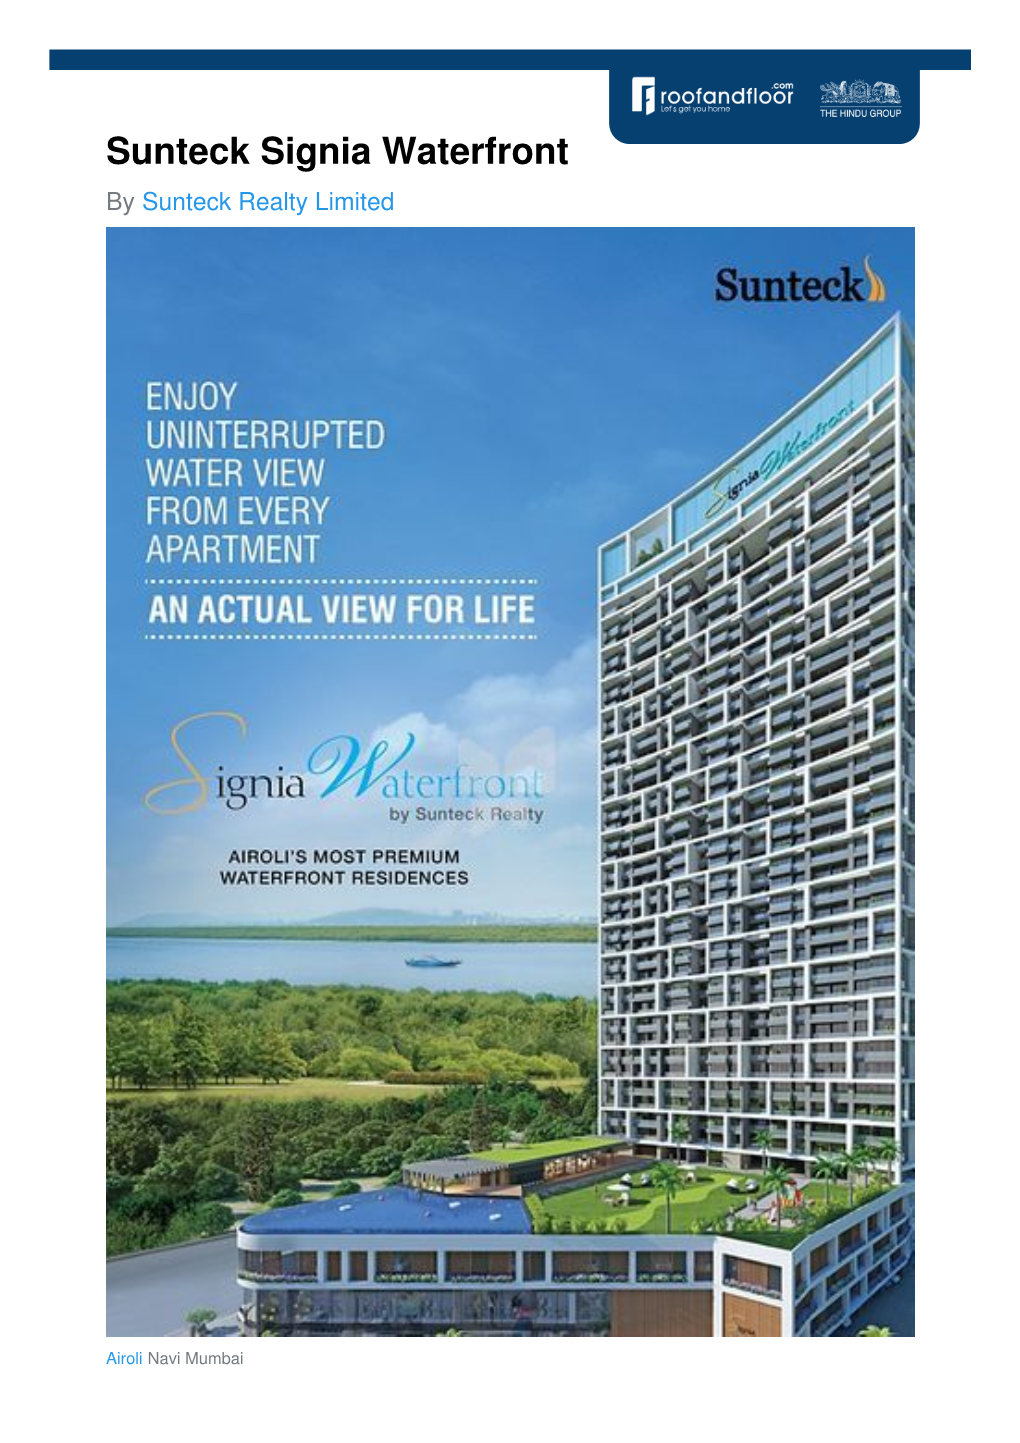 Sunteck Signia Waterfront by Sunteck Realty Limited